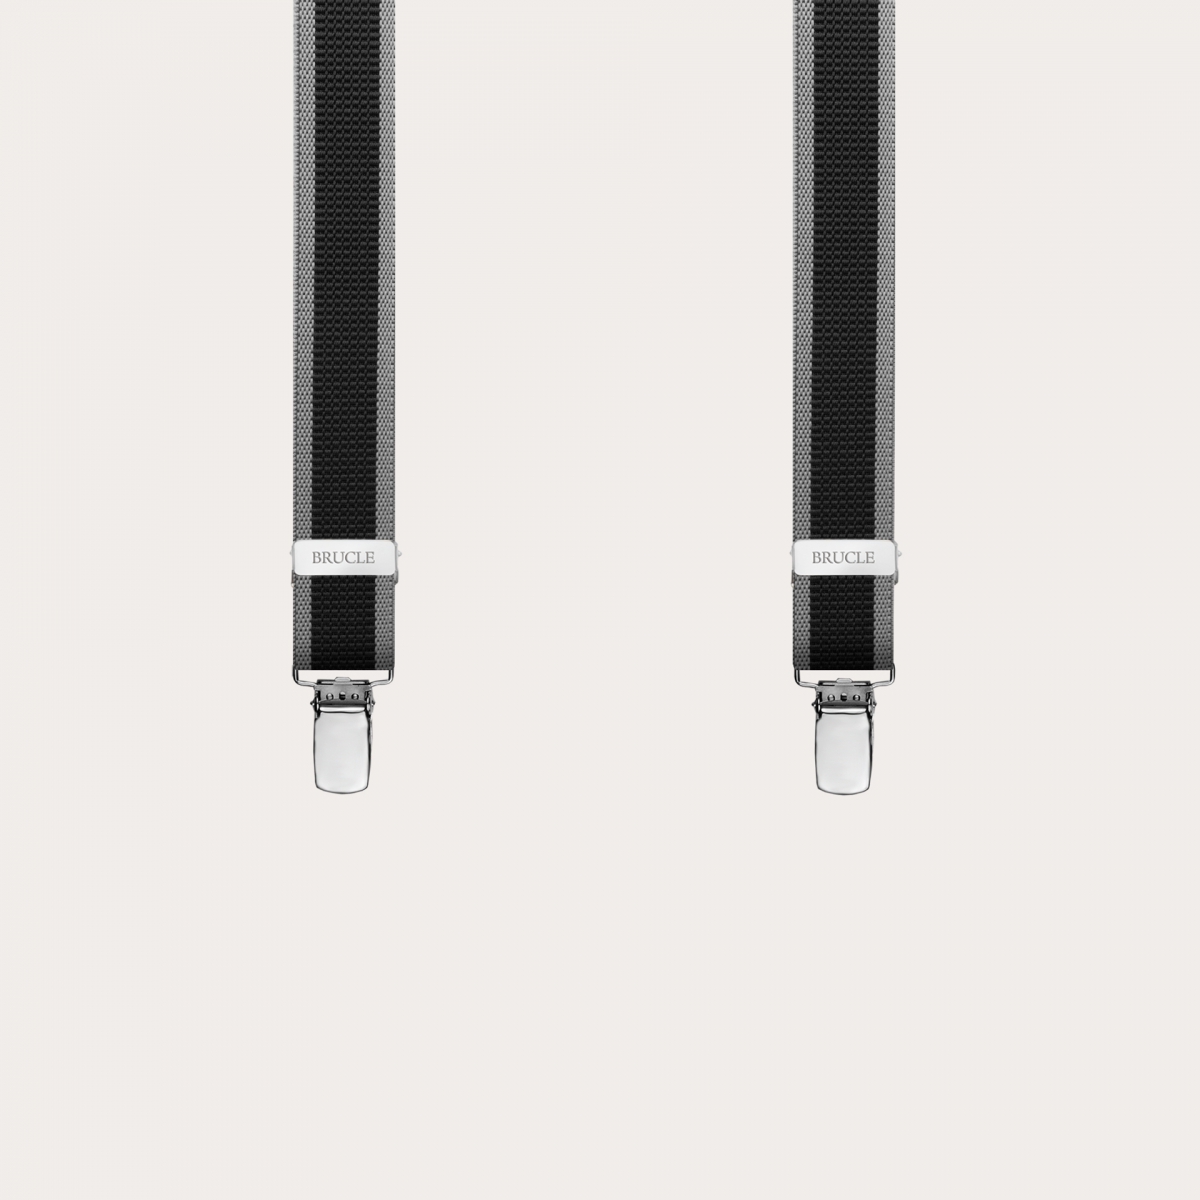 BRUCLE Thin nickel free suspenders with side bands, black and grey